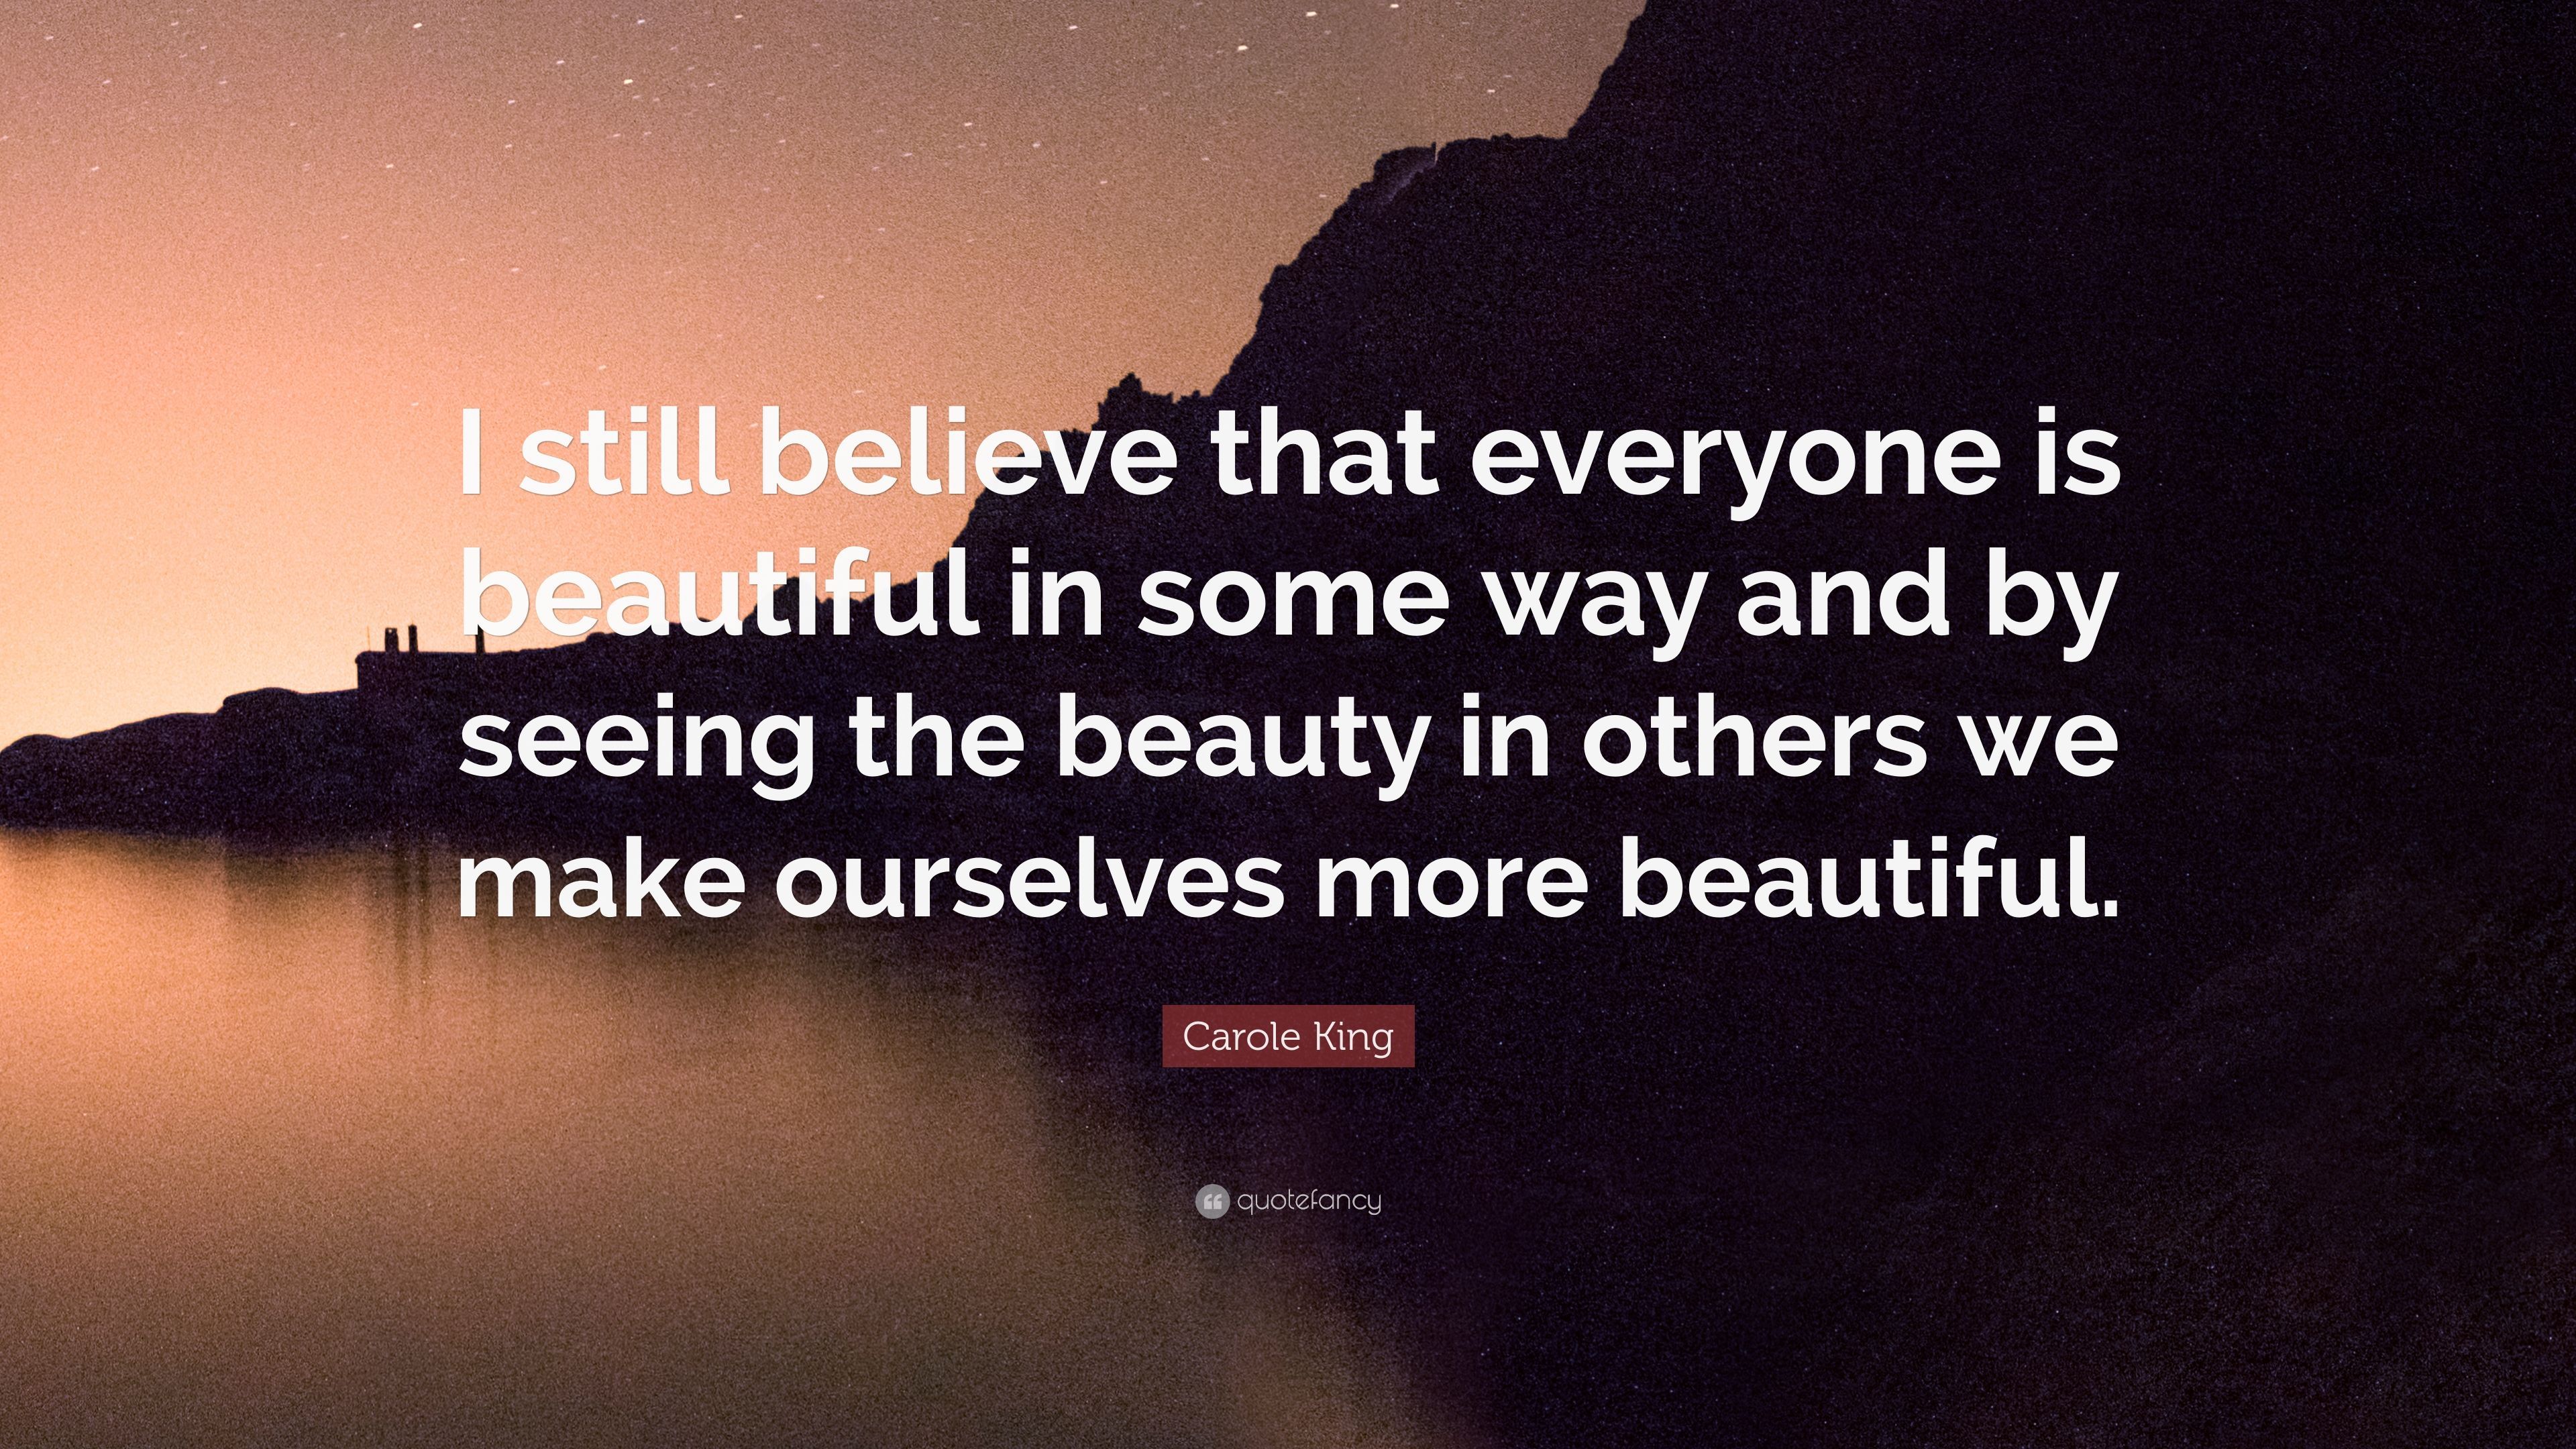 Carole King Quote: “I still believe that everyone is beautiful